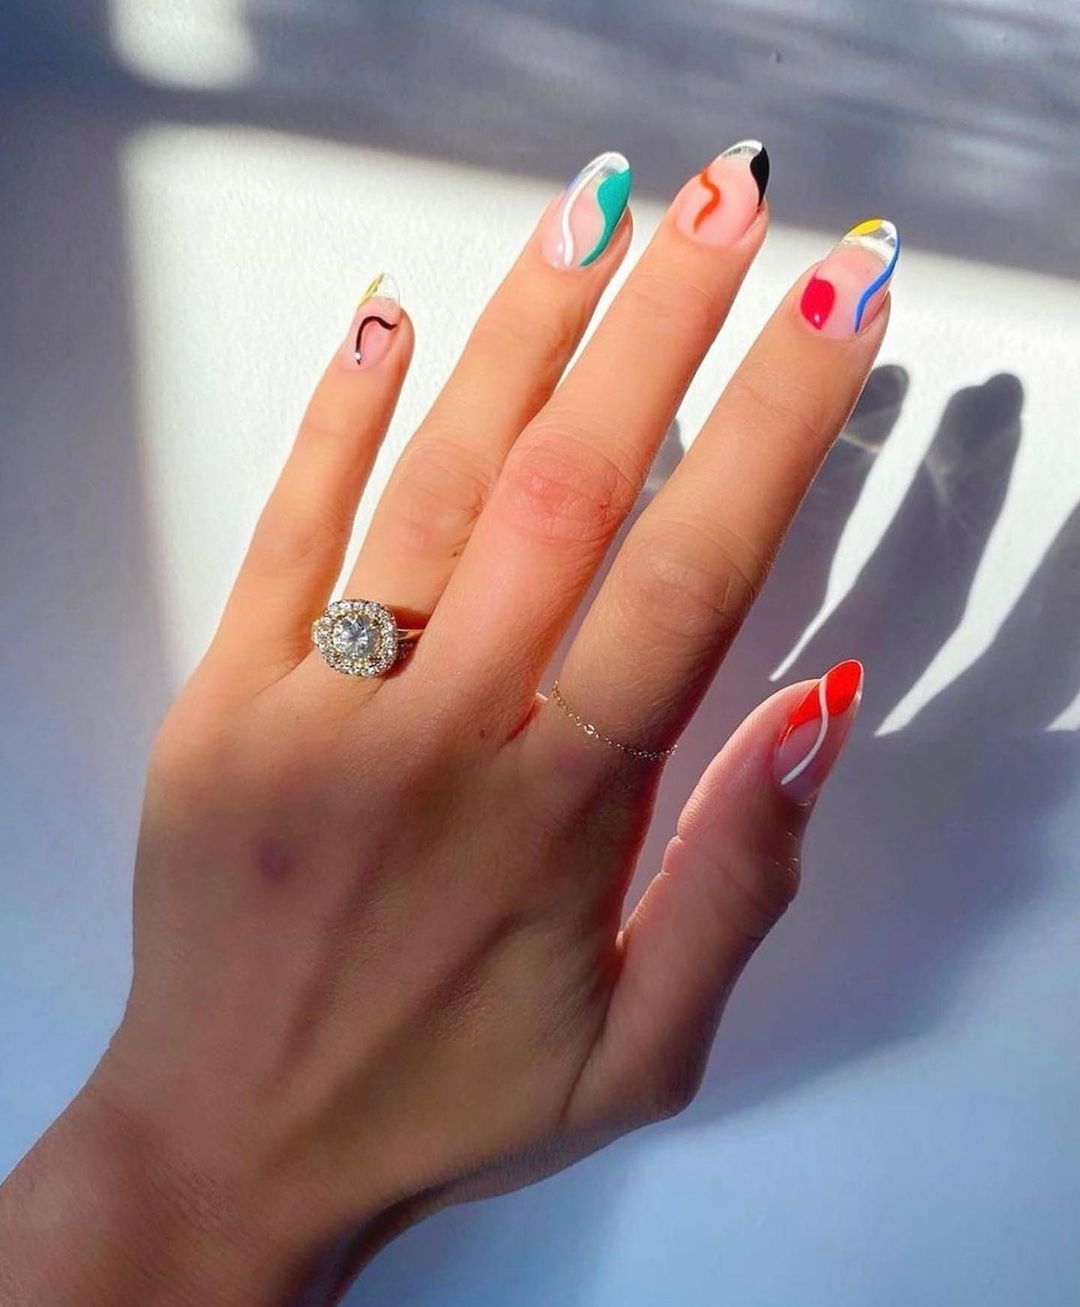 15 Fall Nail Art Designs You Can Actually Do Yourself | Who What Wear